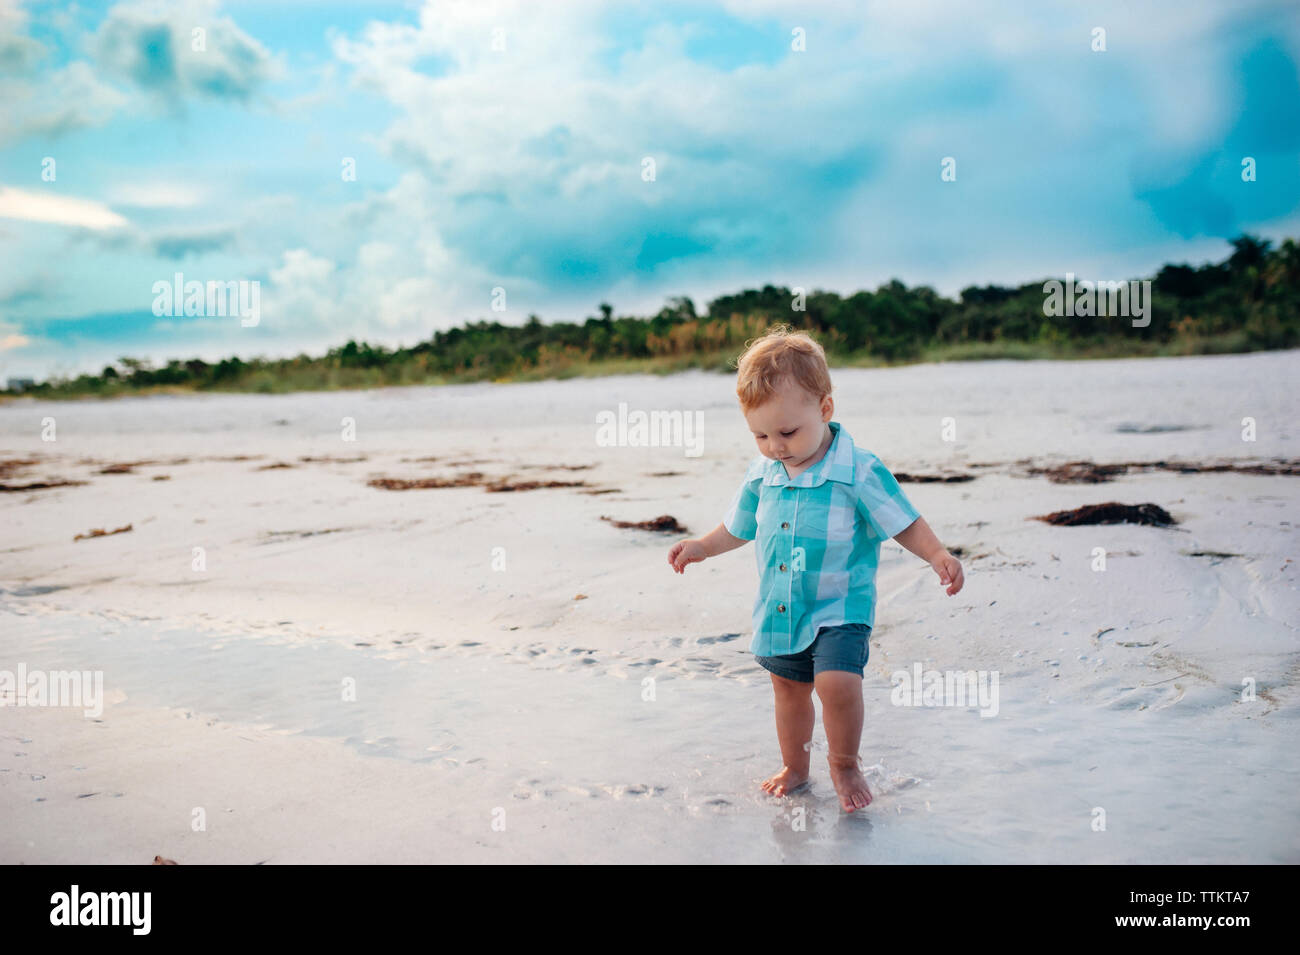 Toddler boy walking on beach in Florida with blue shirt on Stock Photo